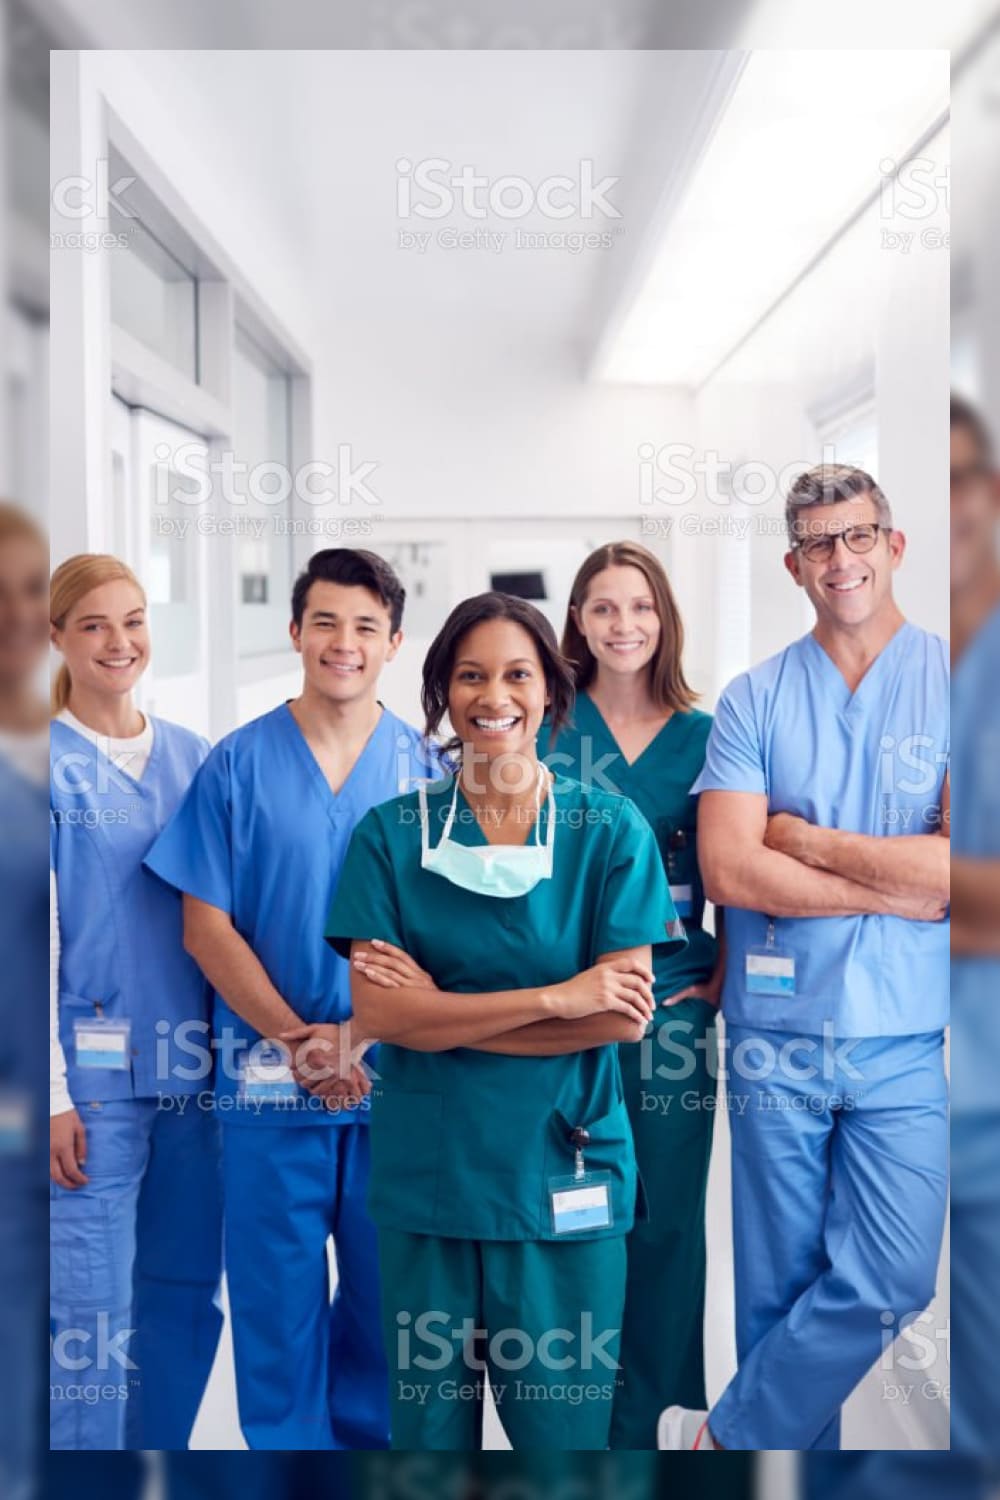 Portrait of smiling multi cultural medical team standing in hospital corridor stock photo.